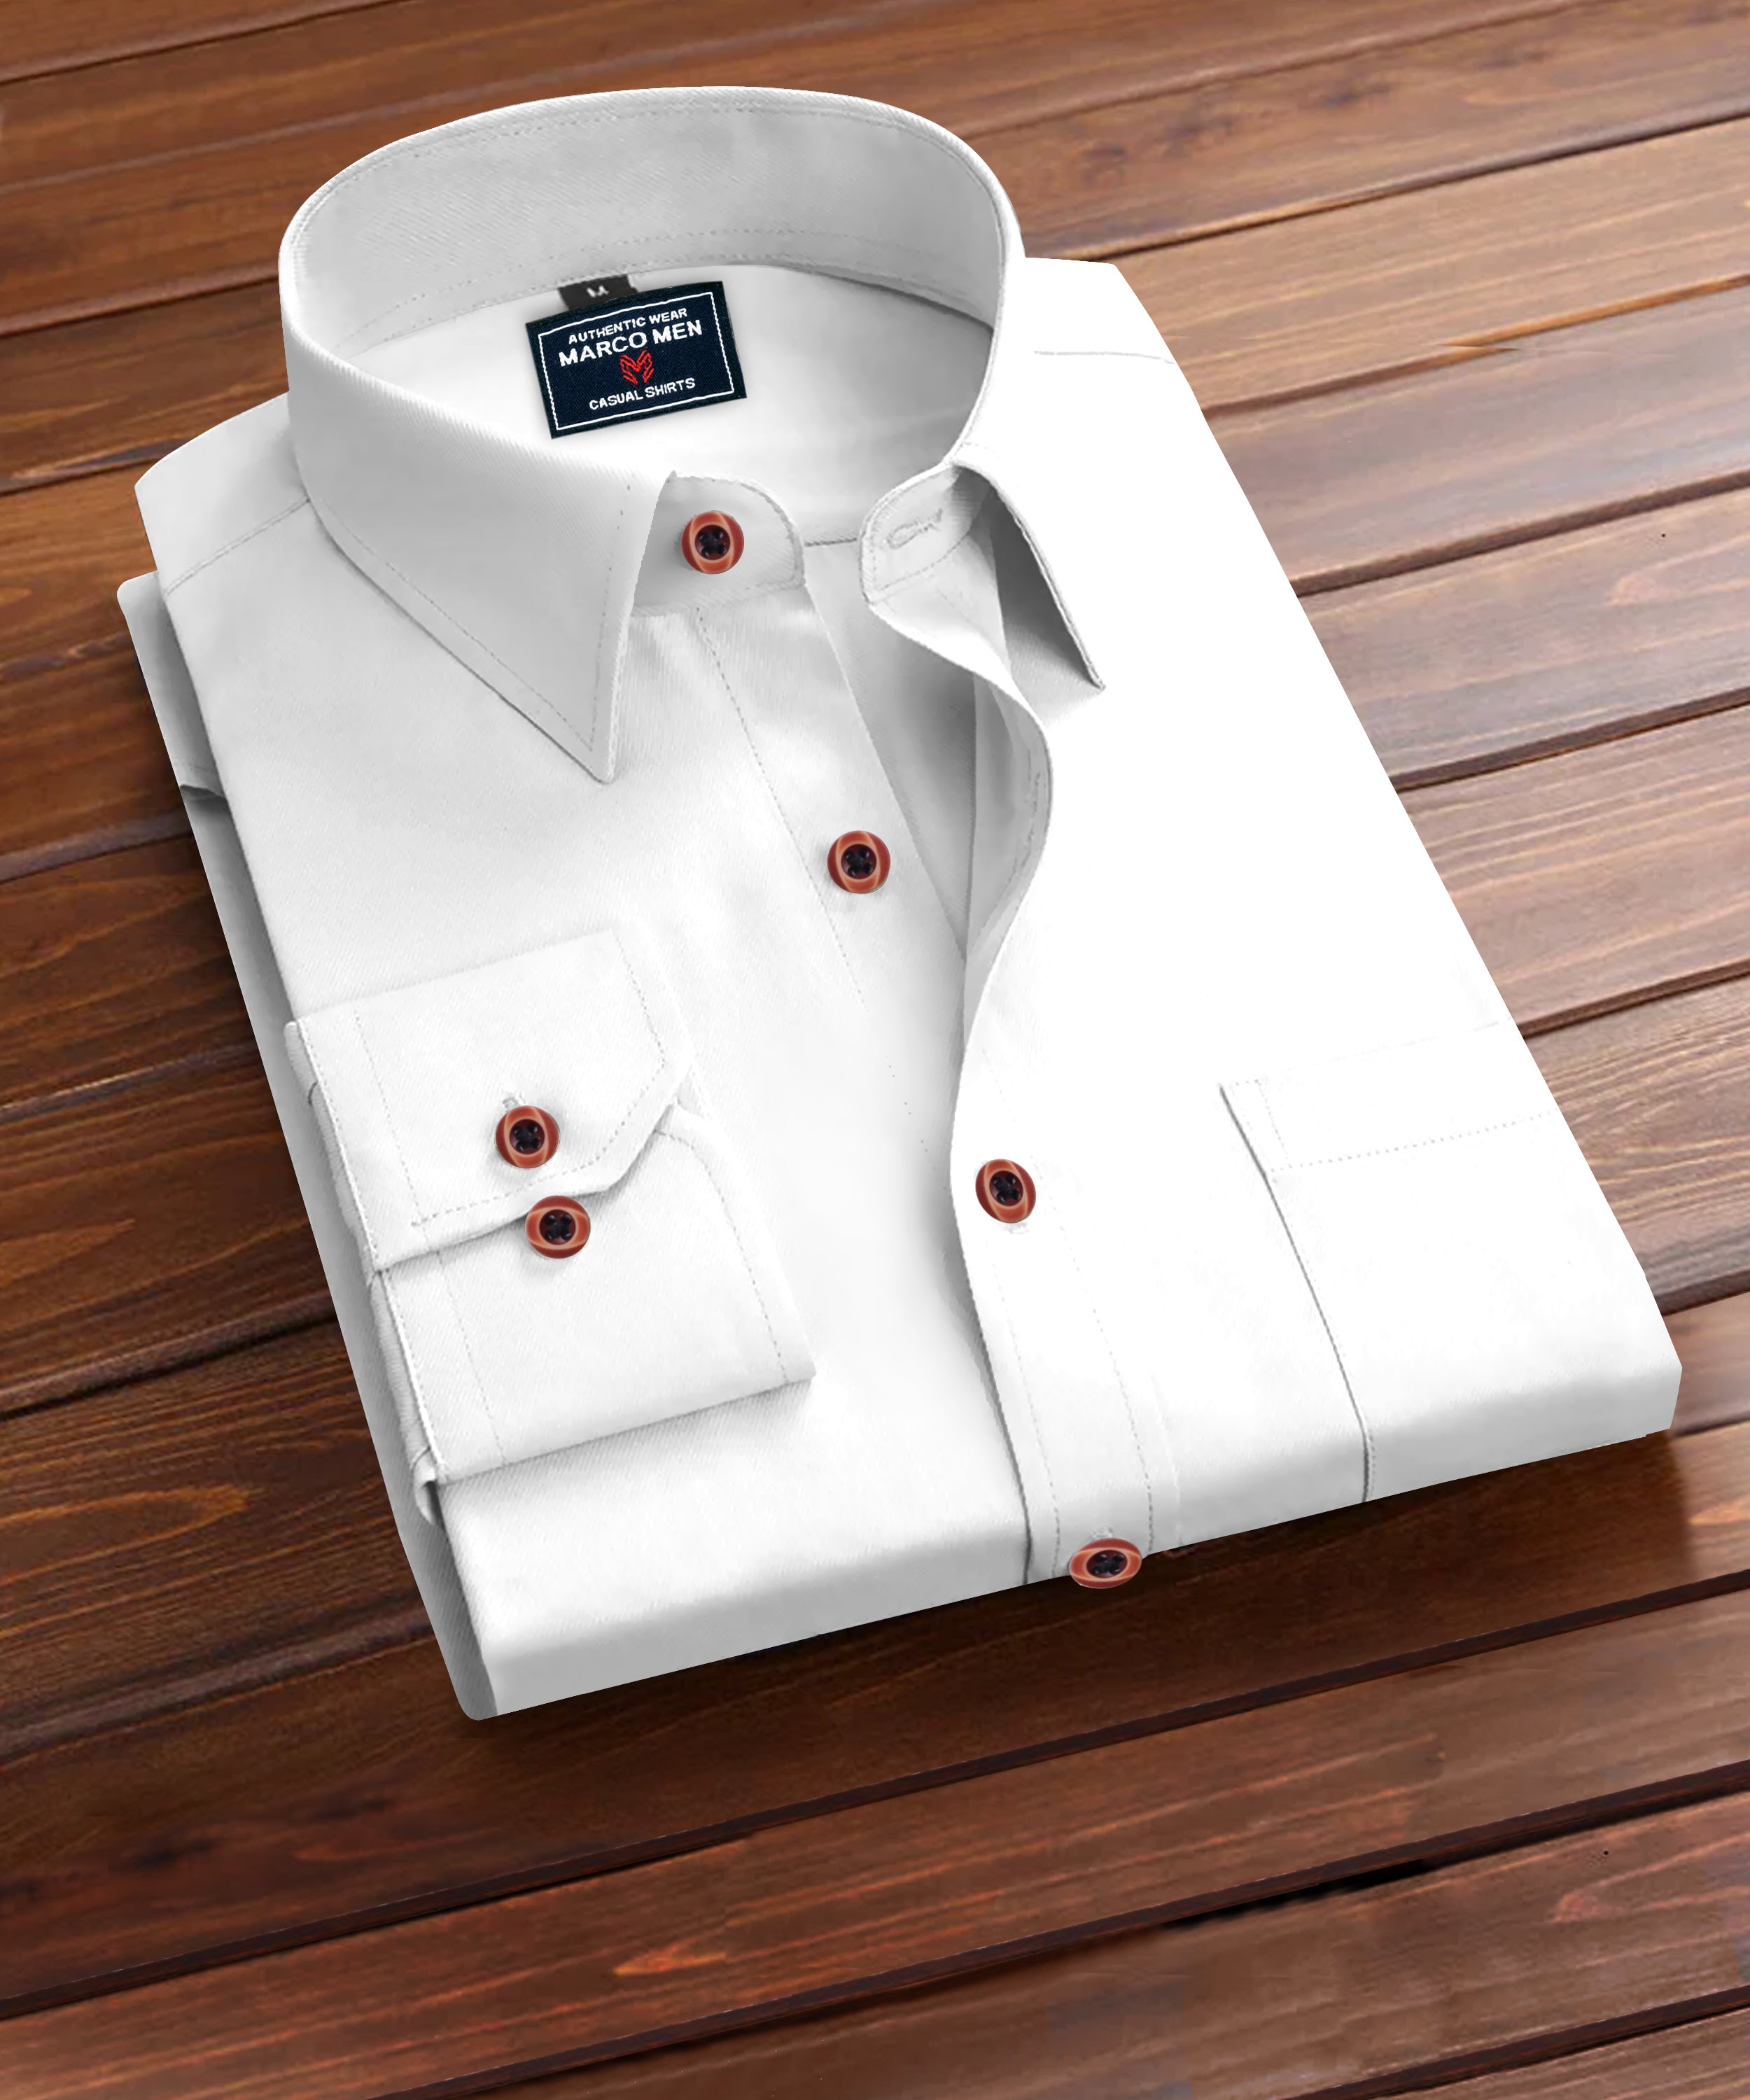 Bright white wooden buttons cotton shirt